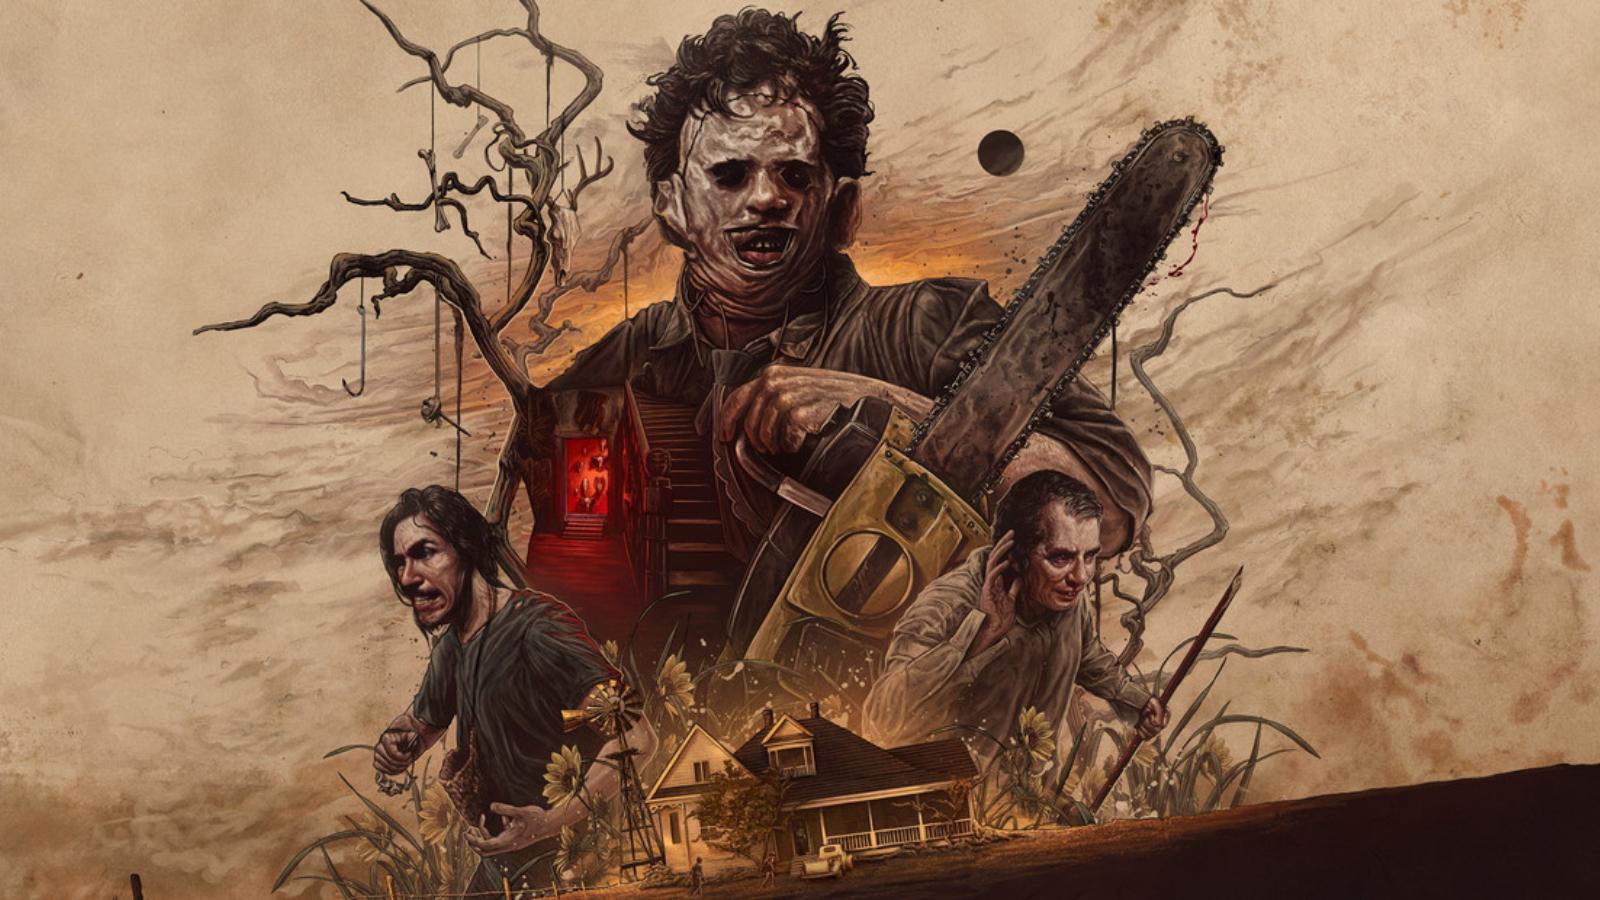 Key art for The Texas Chain Saw Massacre game